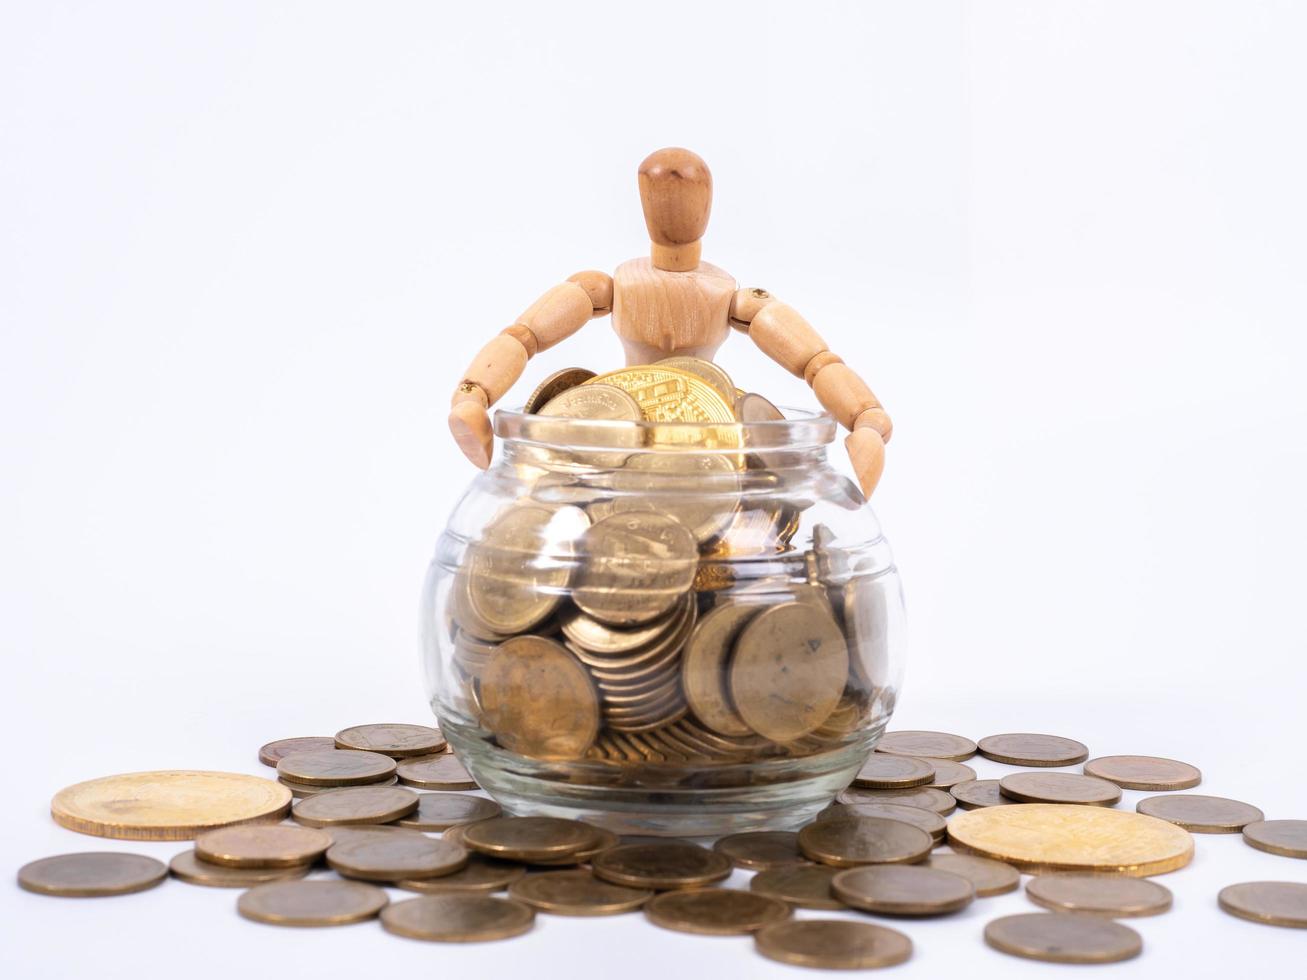 Miniature wooden figure sits on spilled jar with coins. Business concept with coins. photo